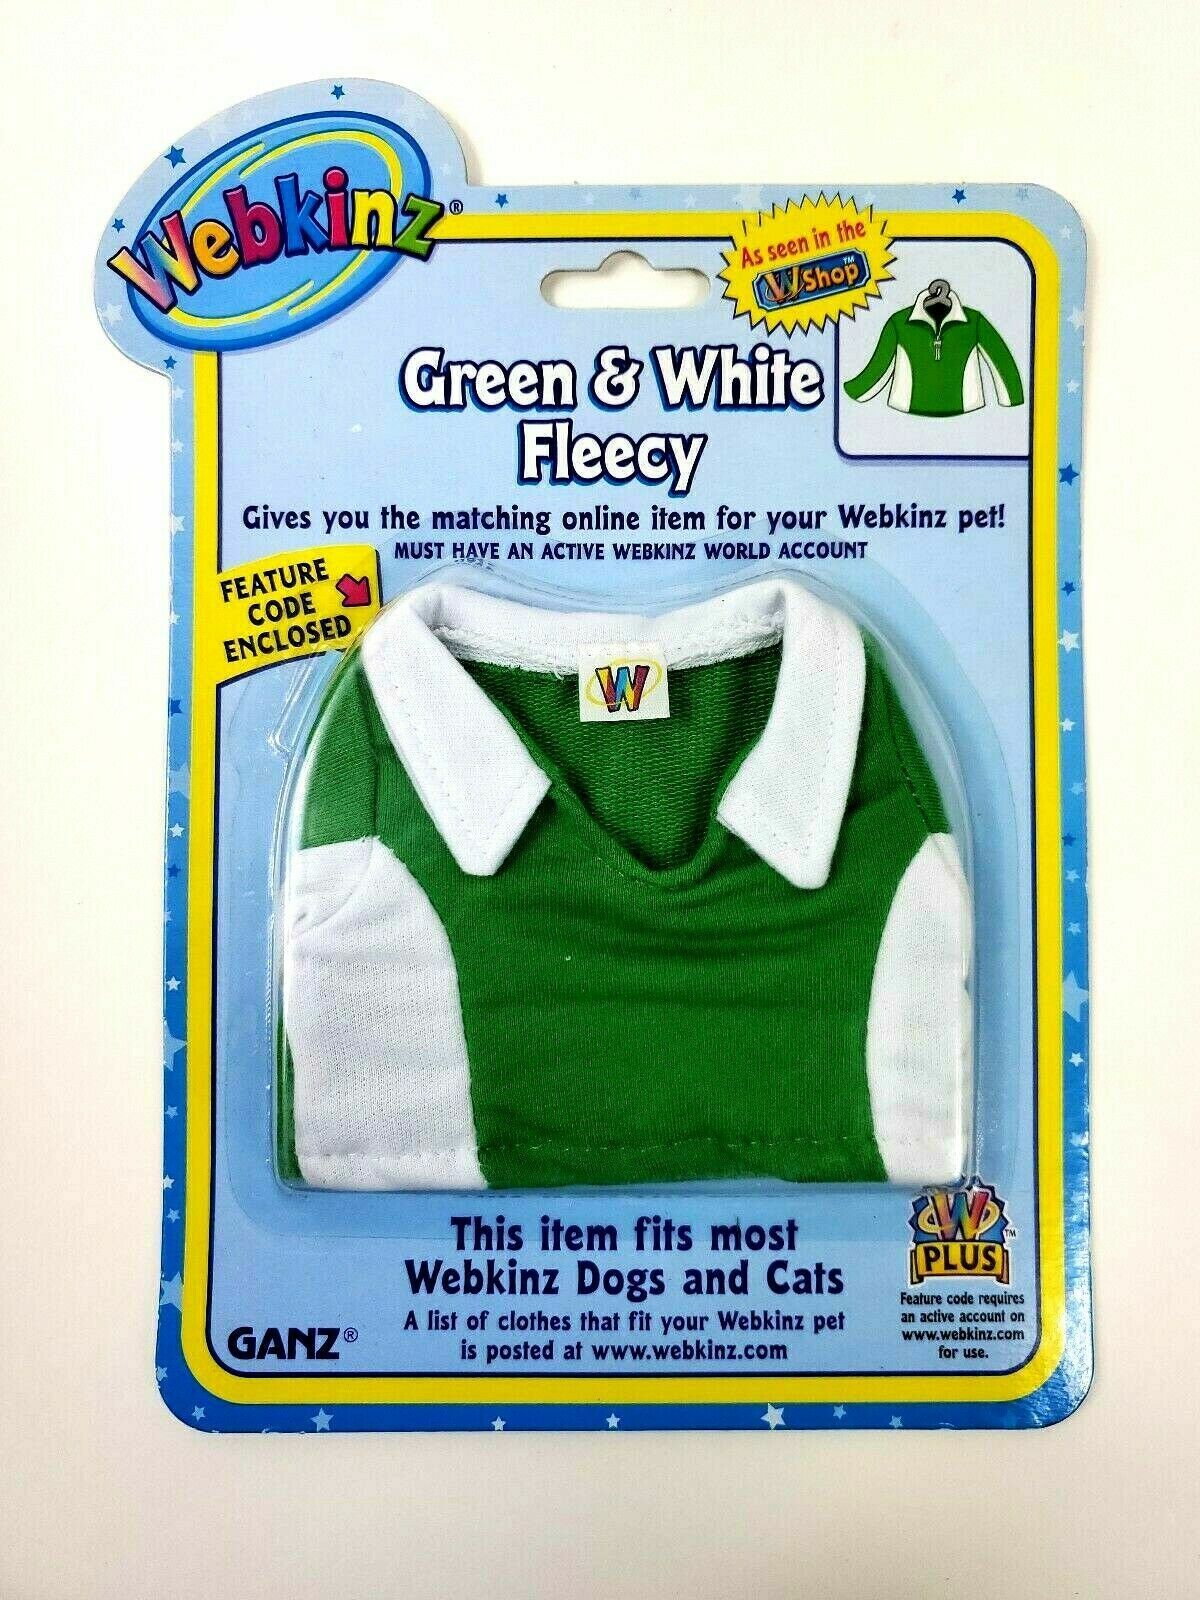 Ganz Webkinz Green and White Fleecy Fits most Webkinz Dogs and Cats